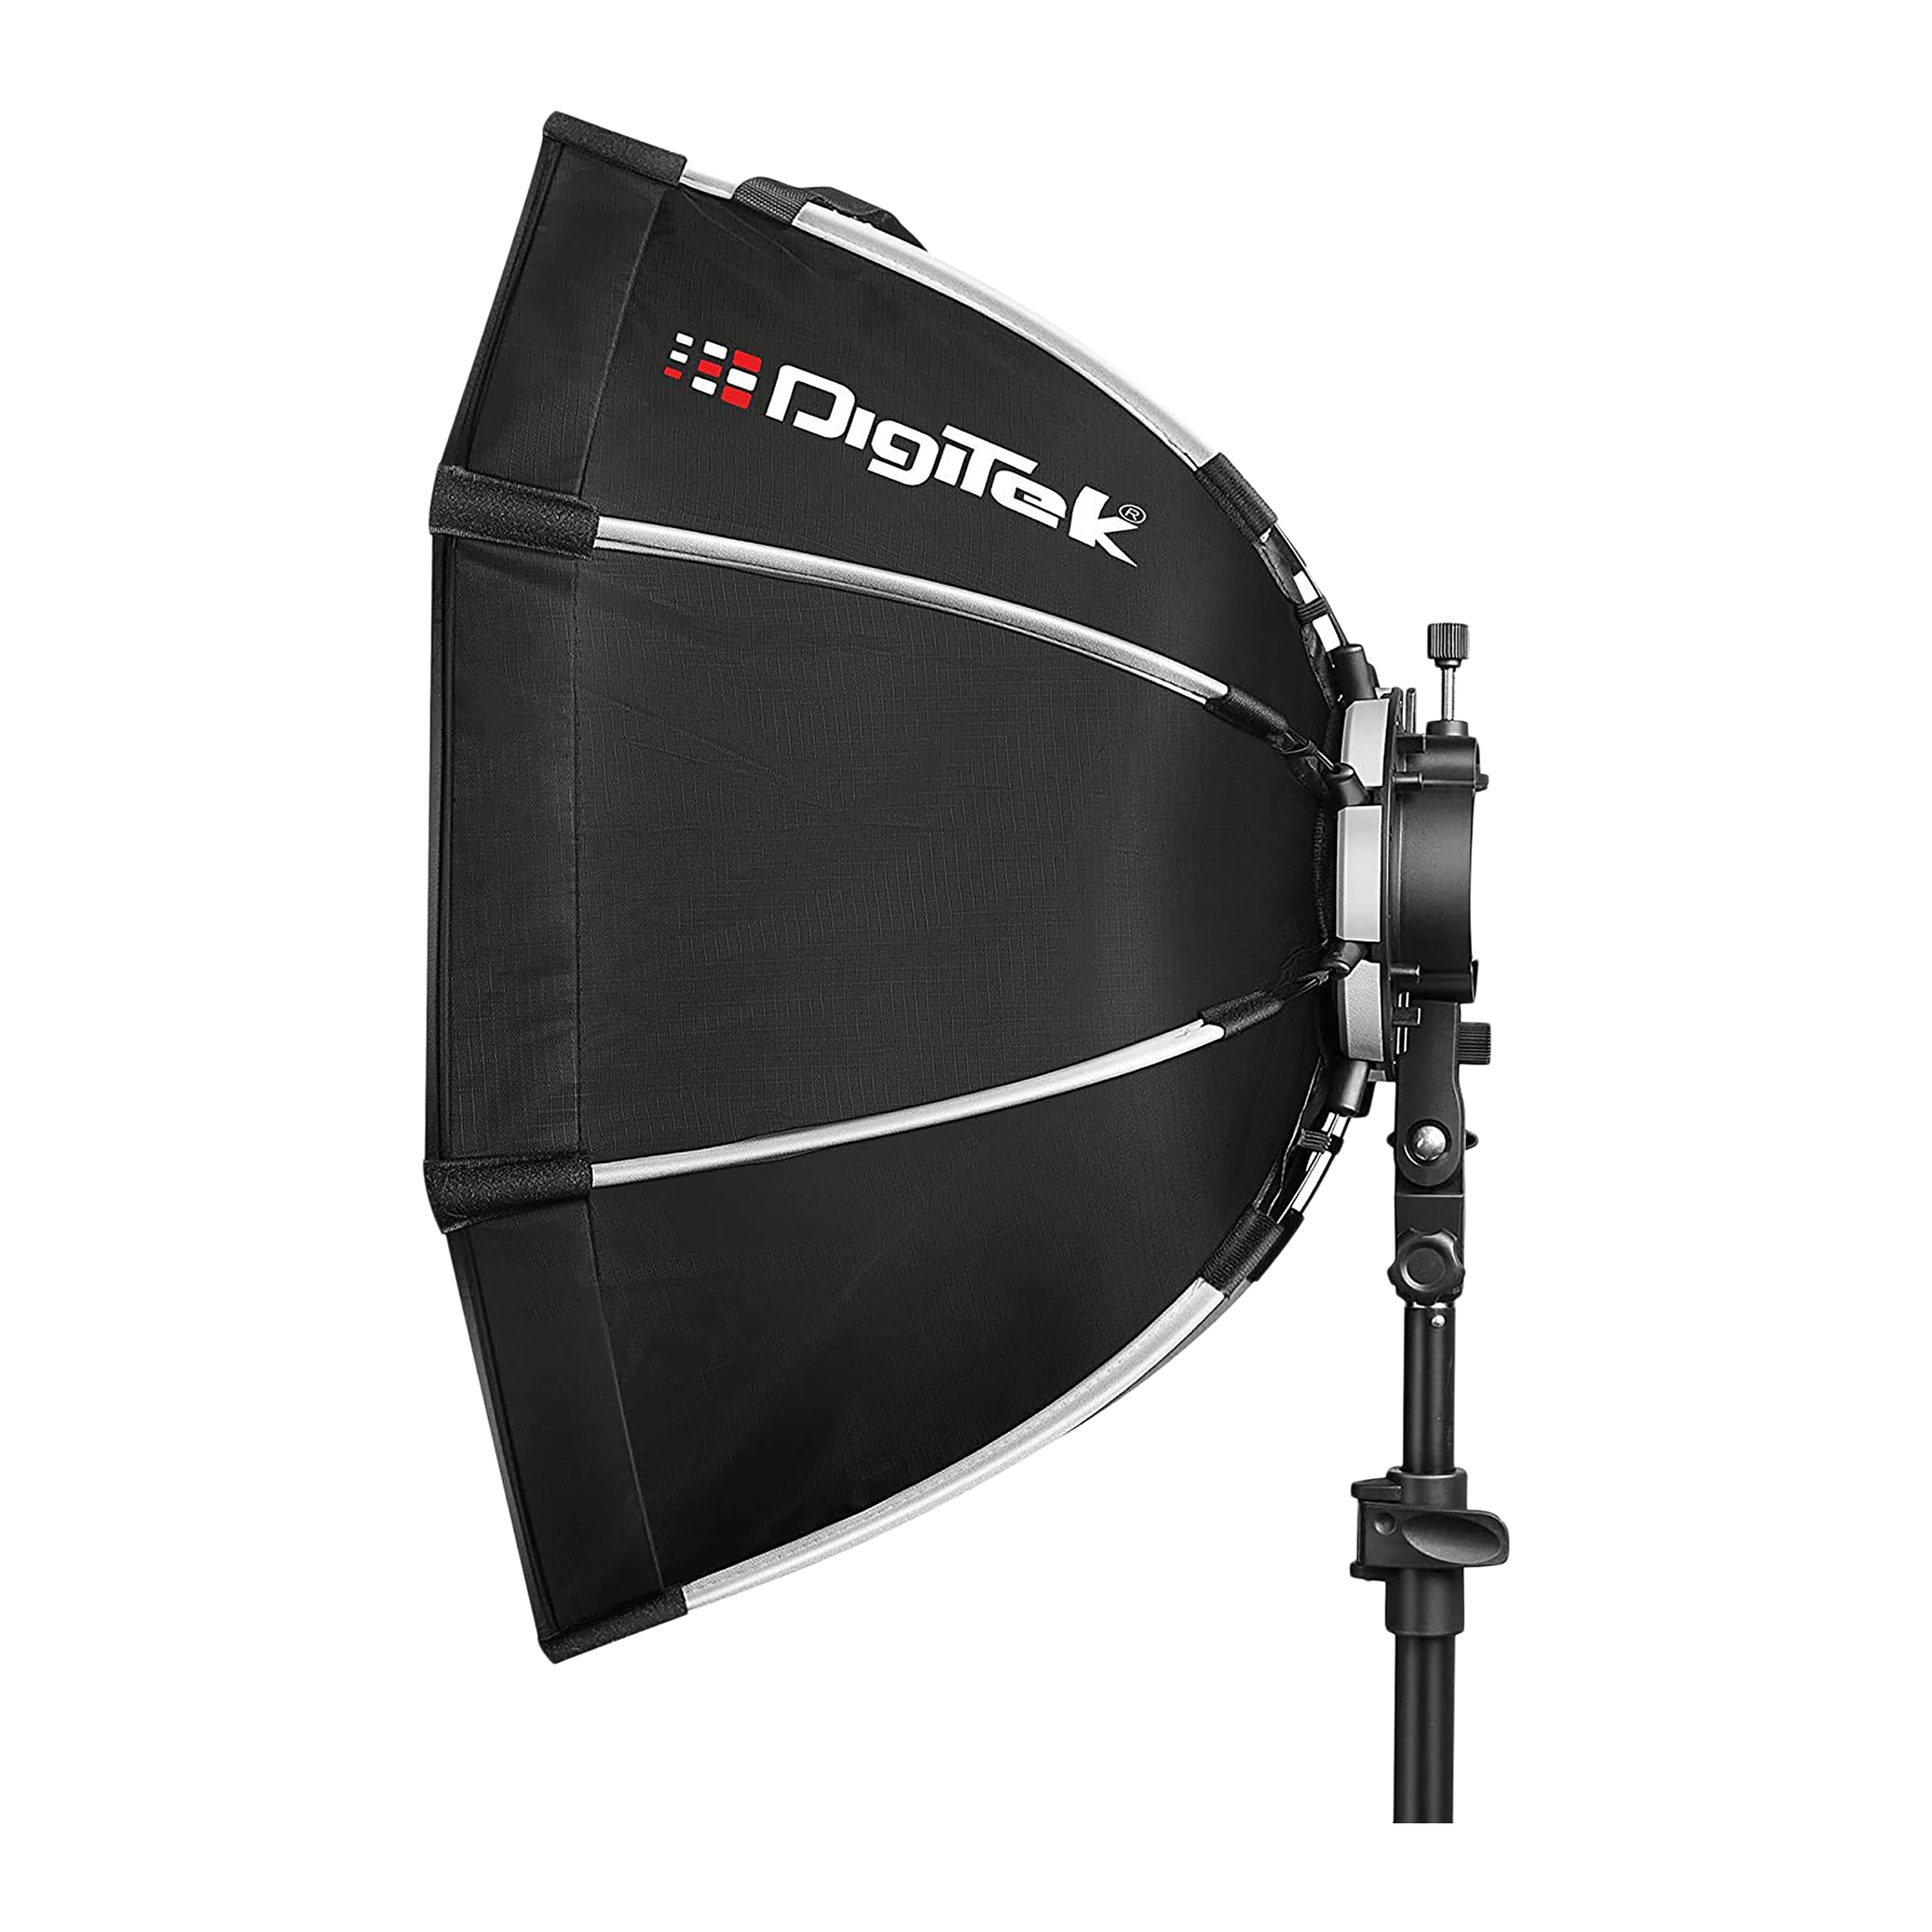 Digitek DSBH 065 Softbox with Bracket, Diffuser Sheets & Carry Case for Photography (Octagon Shape)